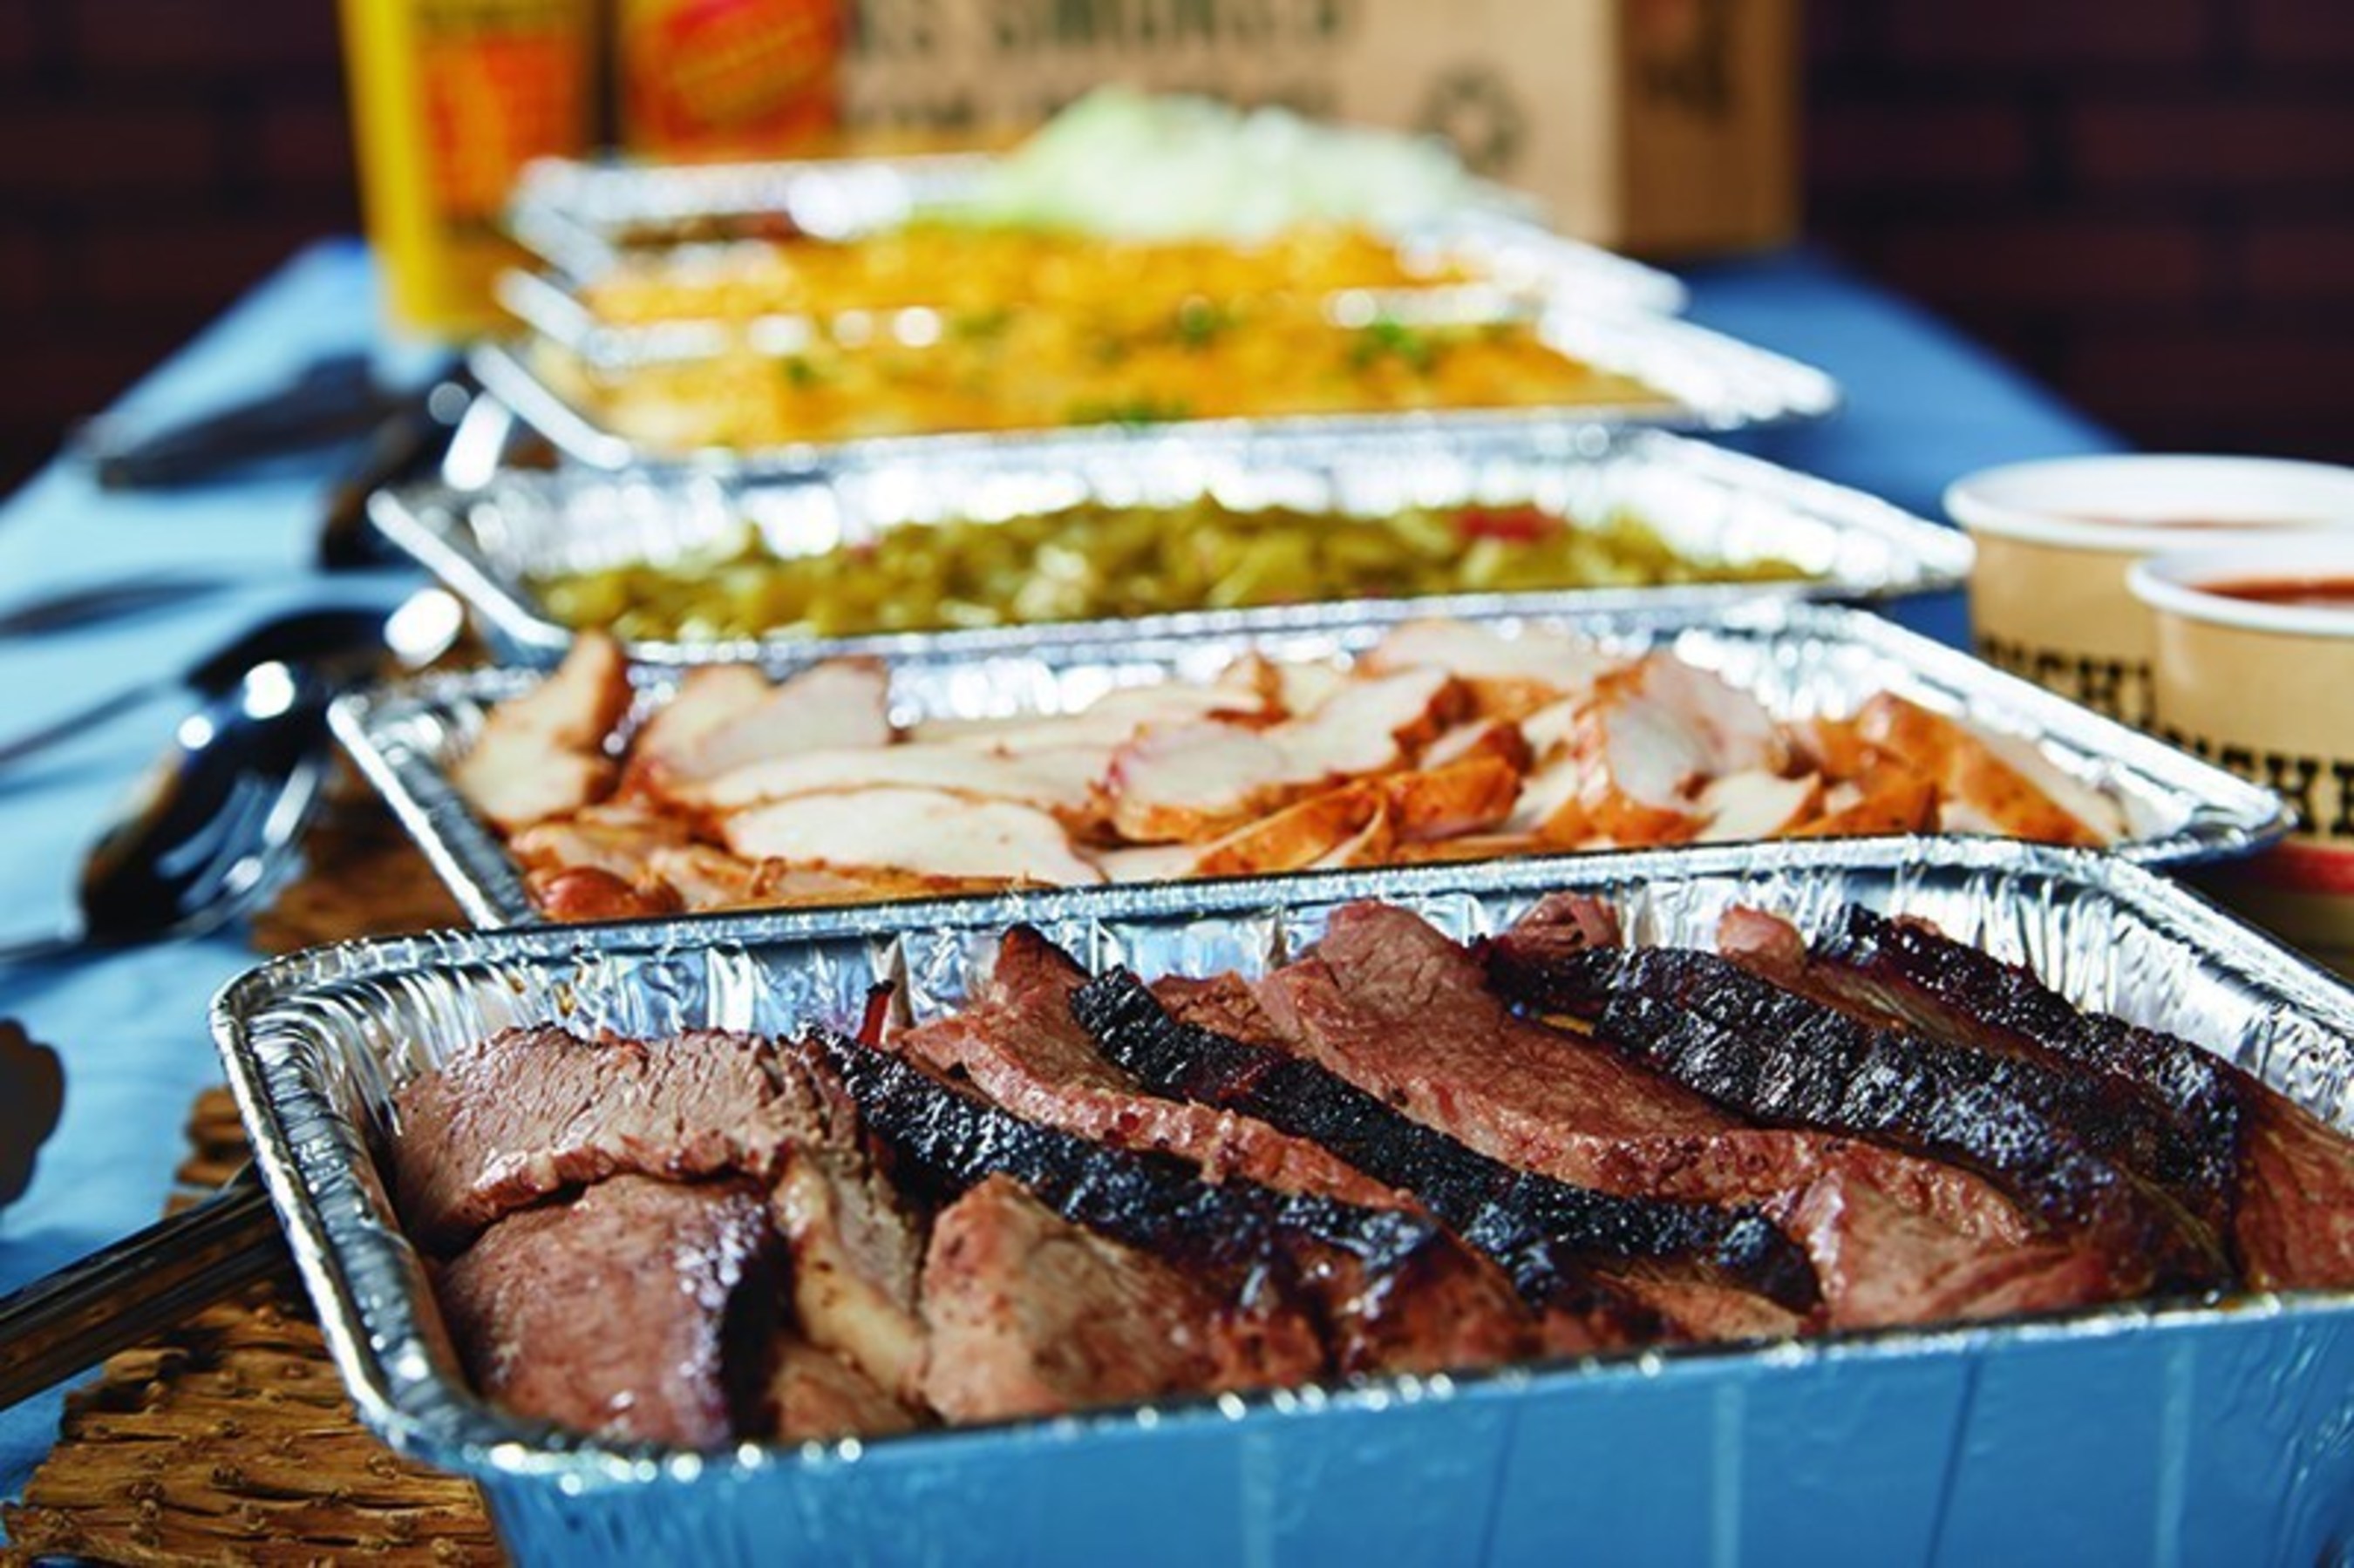 Dickey's Barbecue Pit opens Thursday with both buffet style and full-service catering options available.